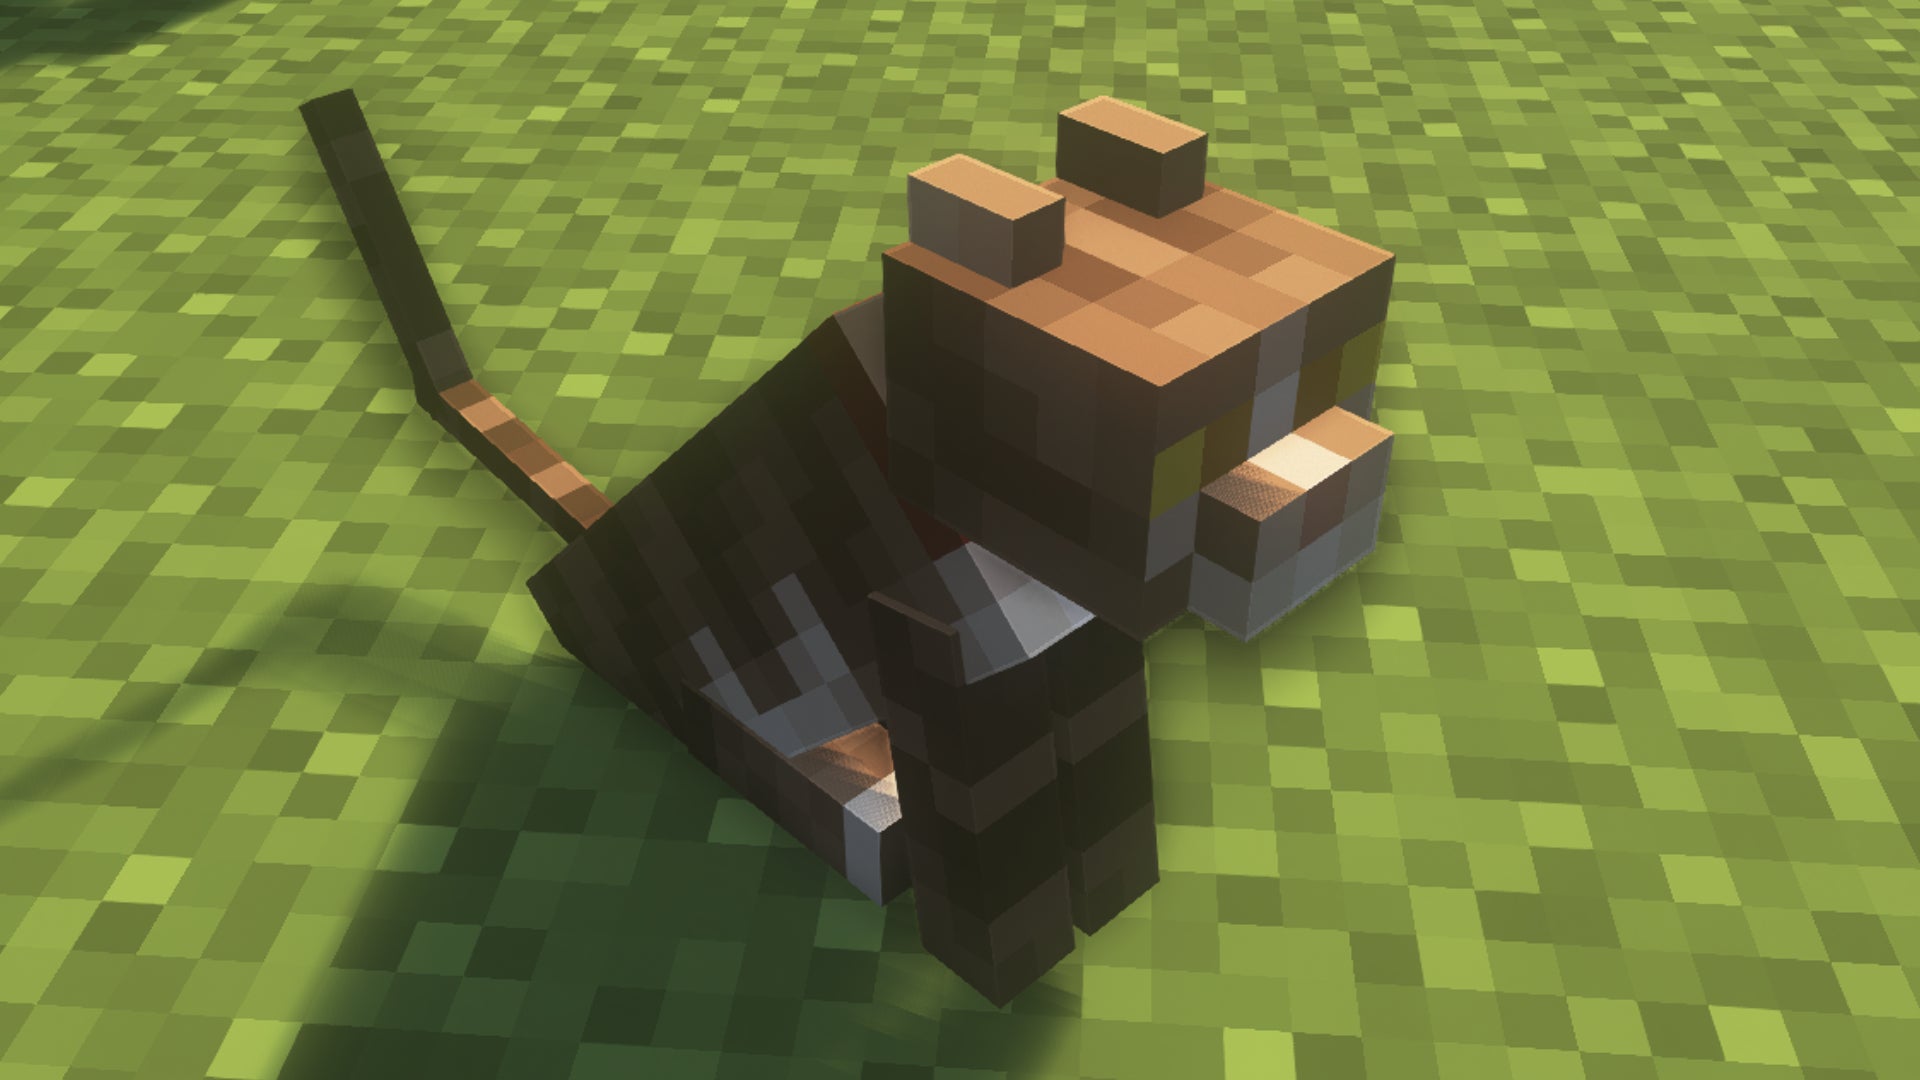 A cat sitting down on some grass in Minecraft.